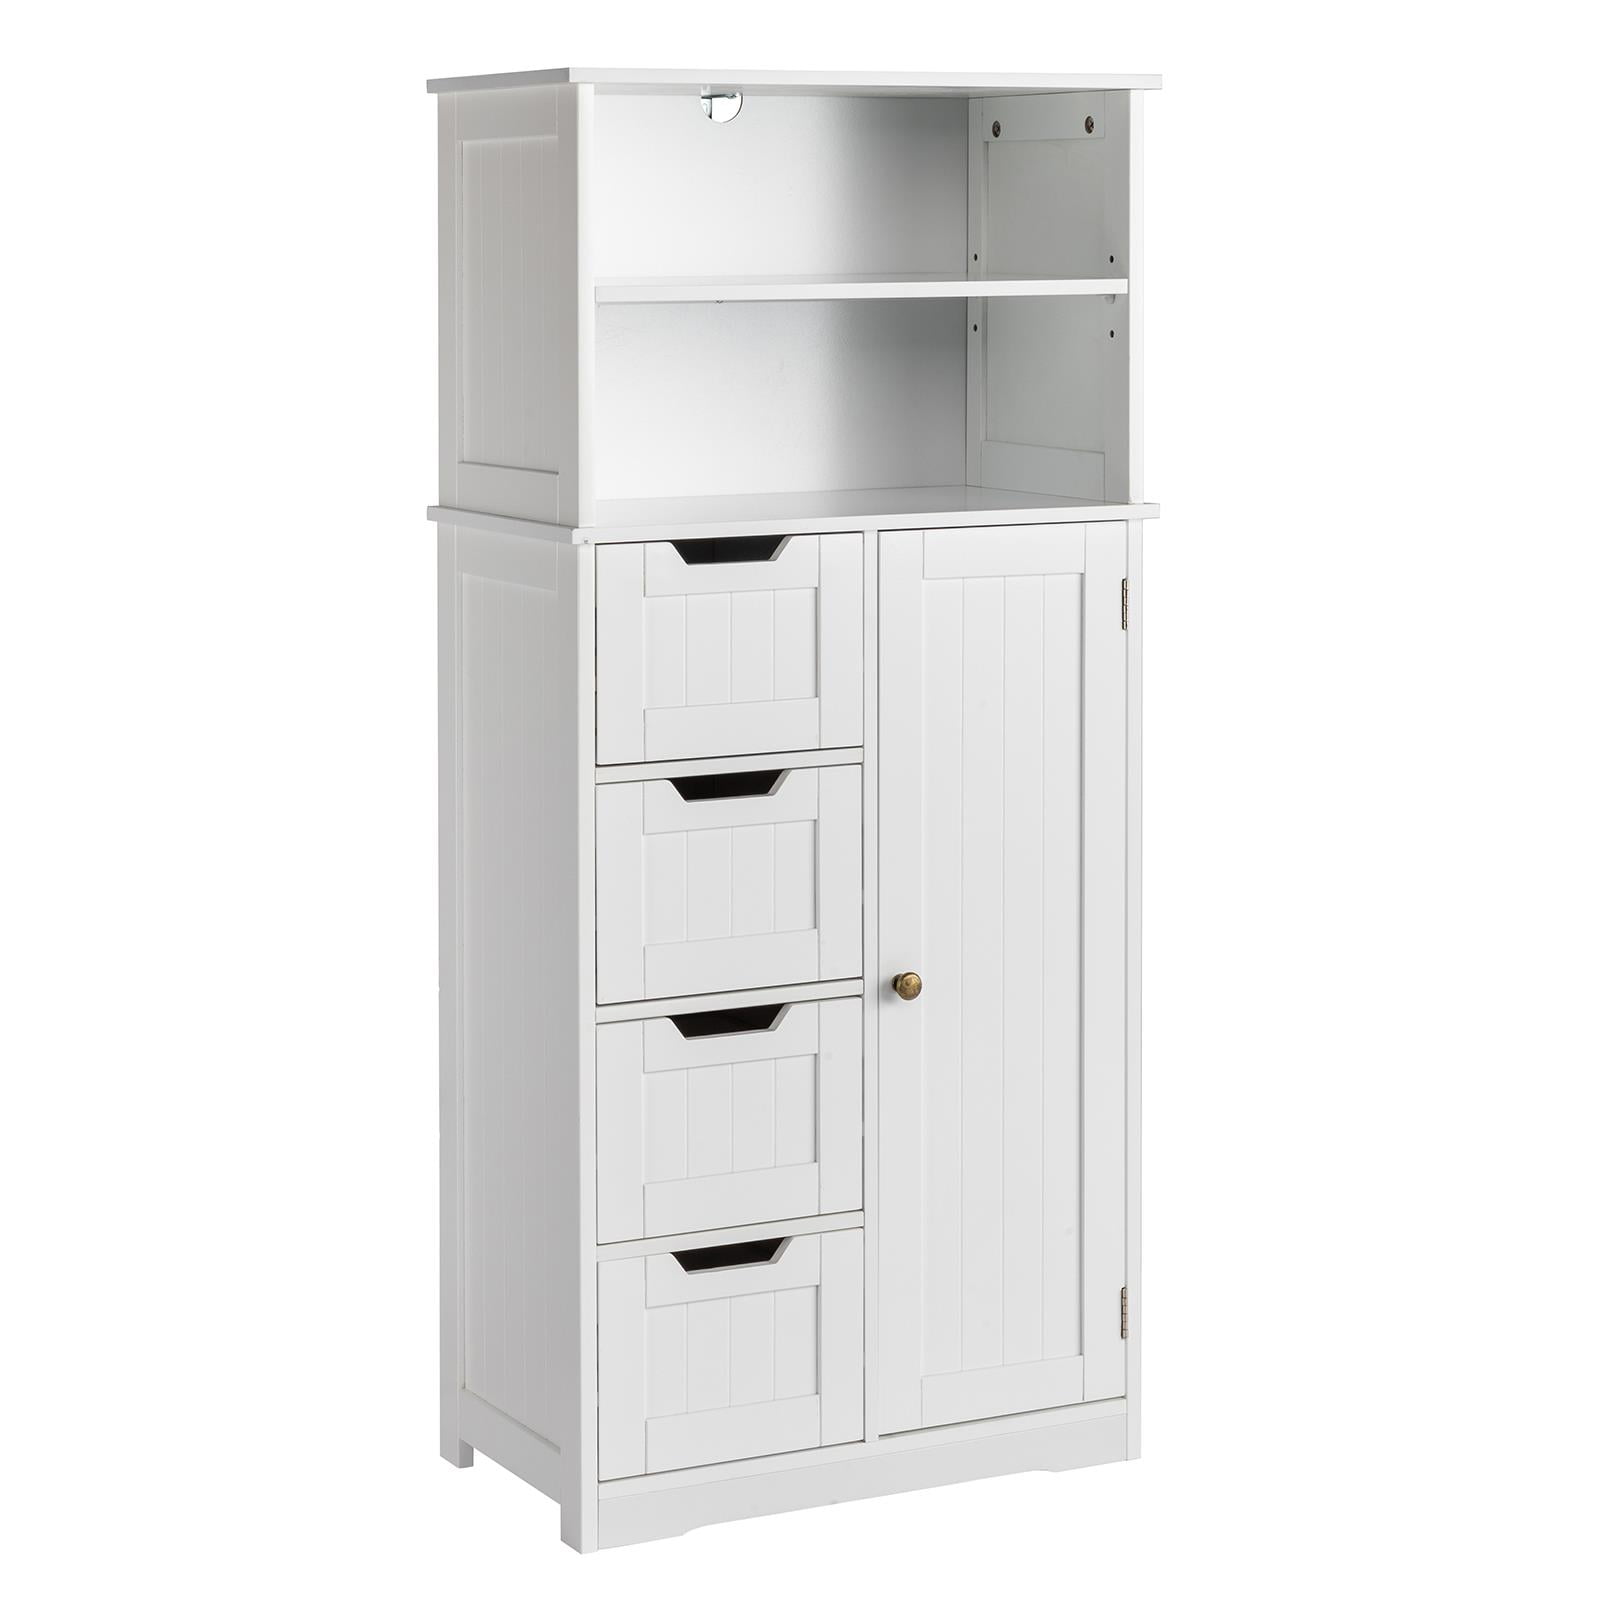 usikey Floor Bathroom Storage Cabinet with 4 Removable Drawers and 1 Door  with AdjustableShelves, Side Storage Organizer for Living Room, Bedroom